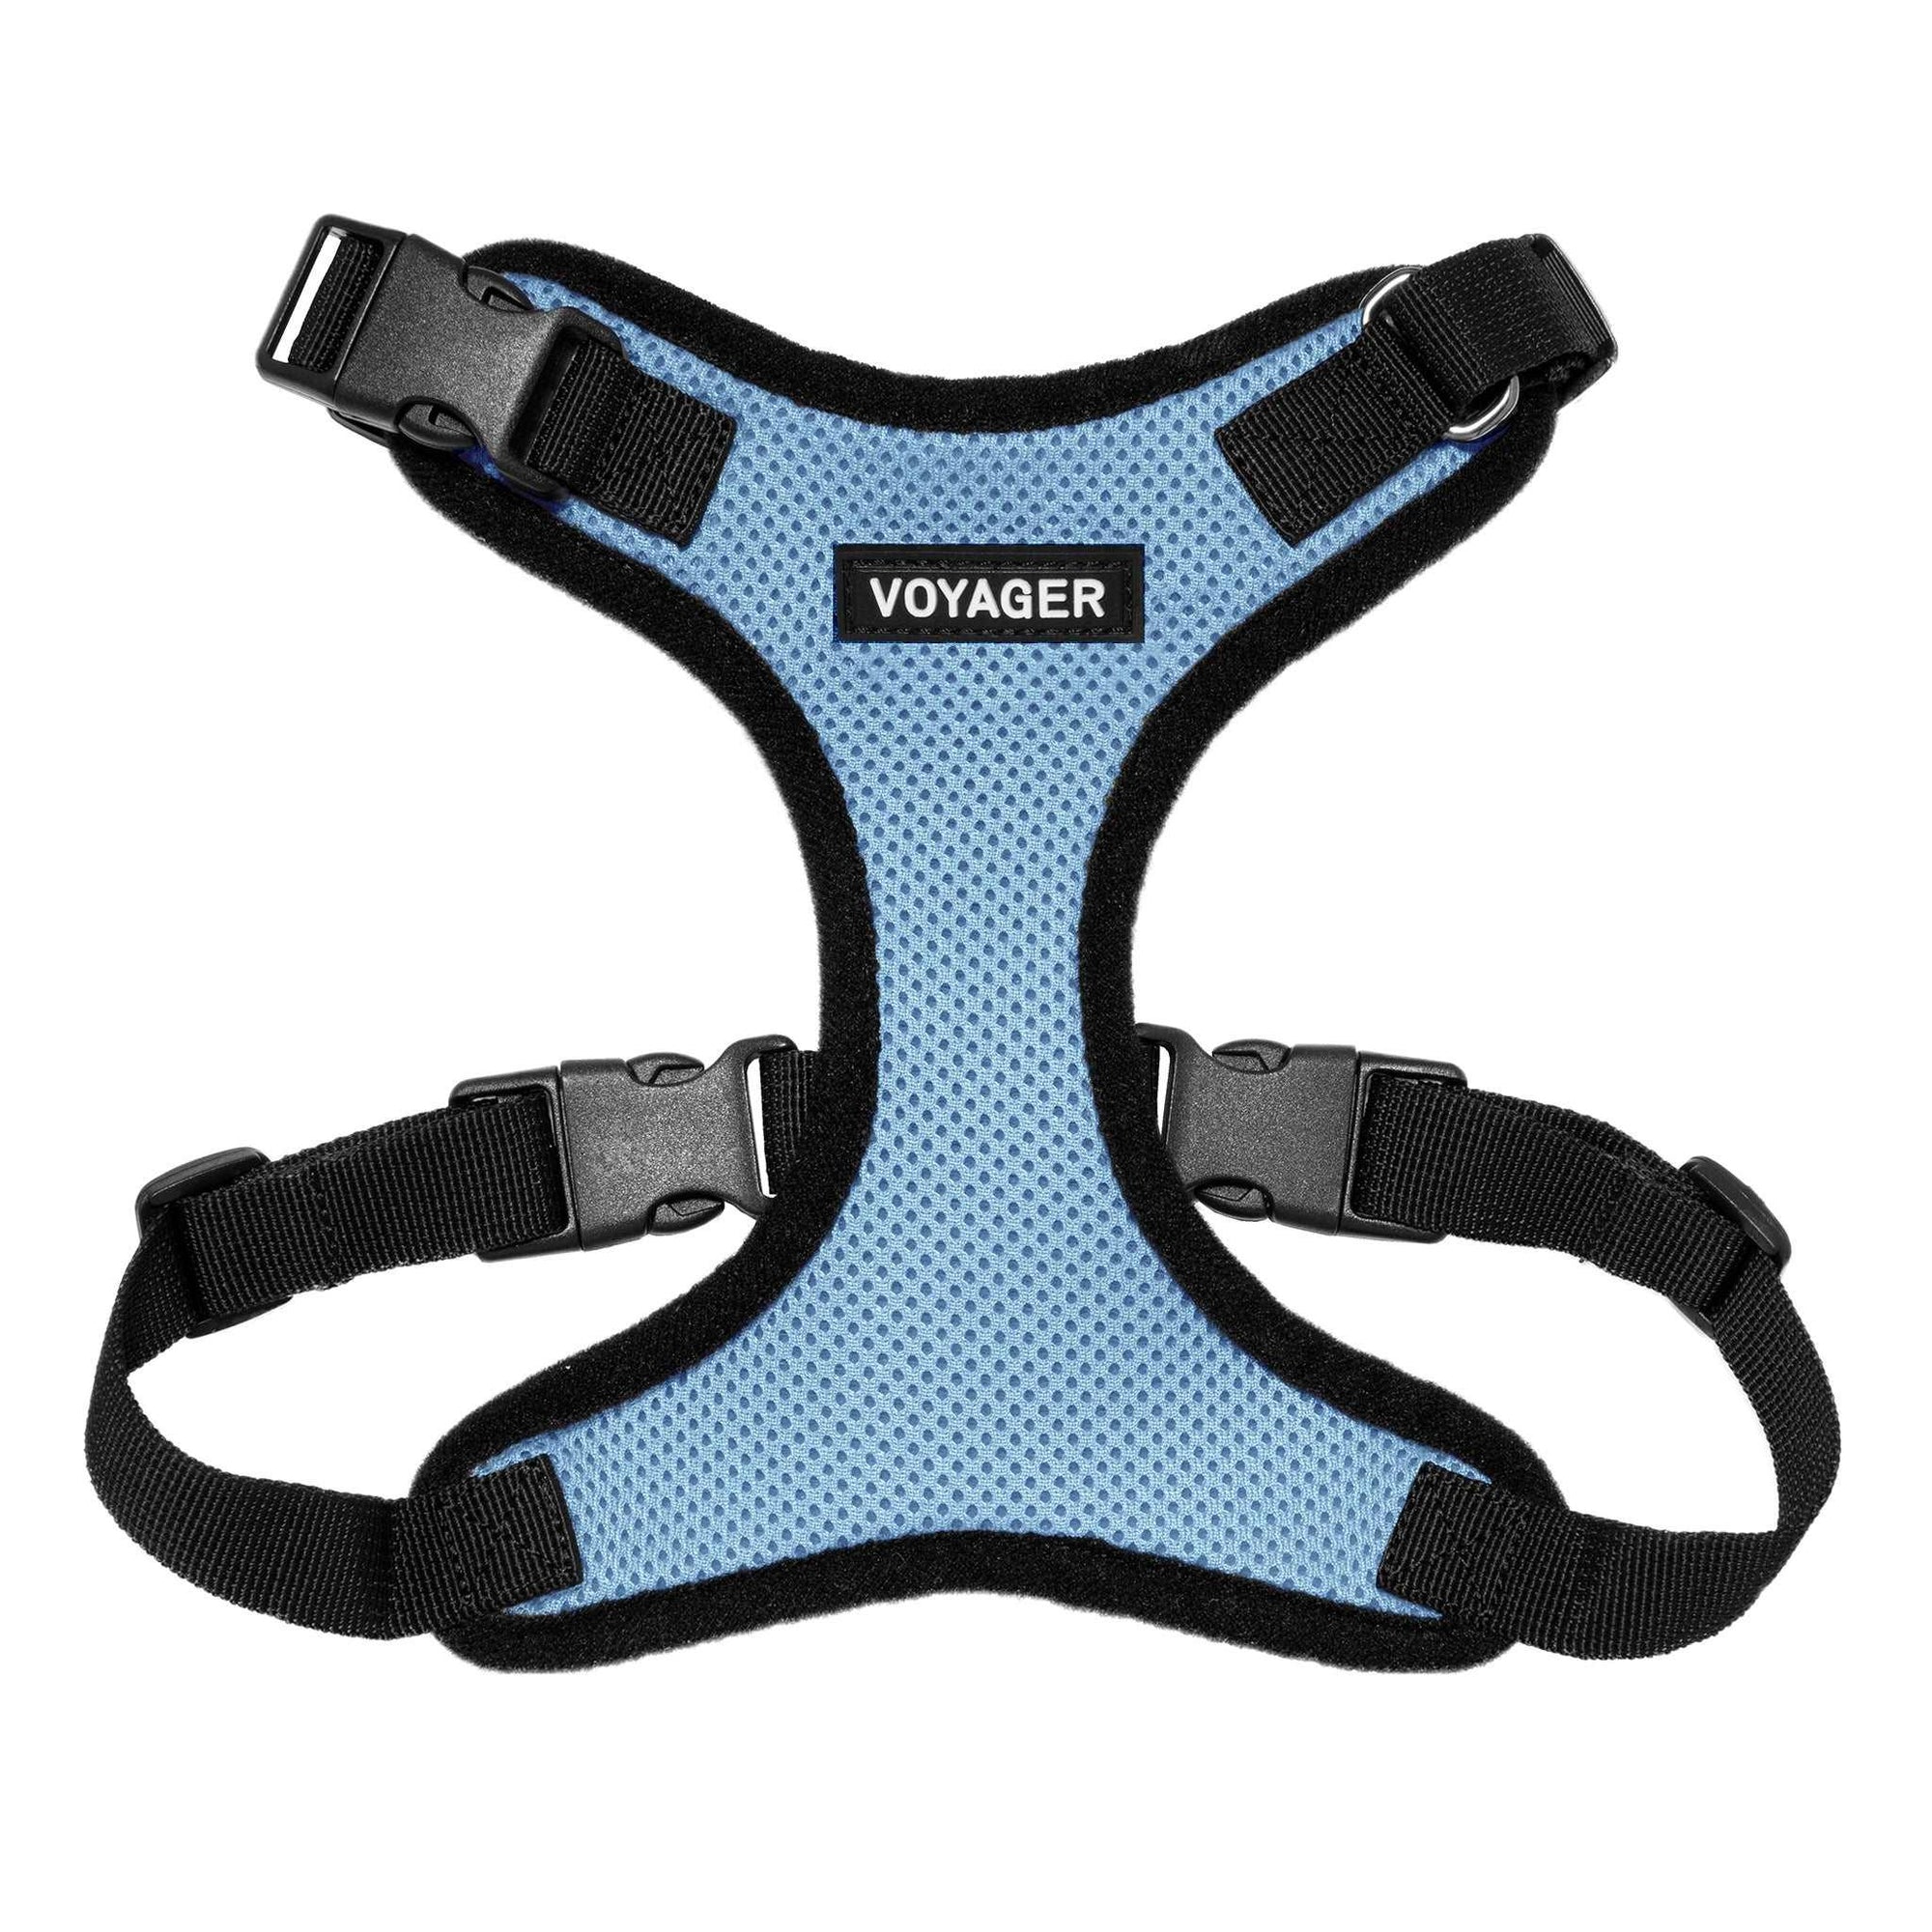 VOYAGER Step-In Lock Dog Harness in Baby Blue with Black Trim and Webbing - Front